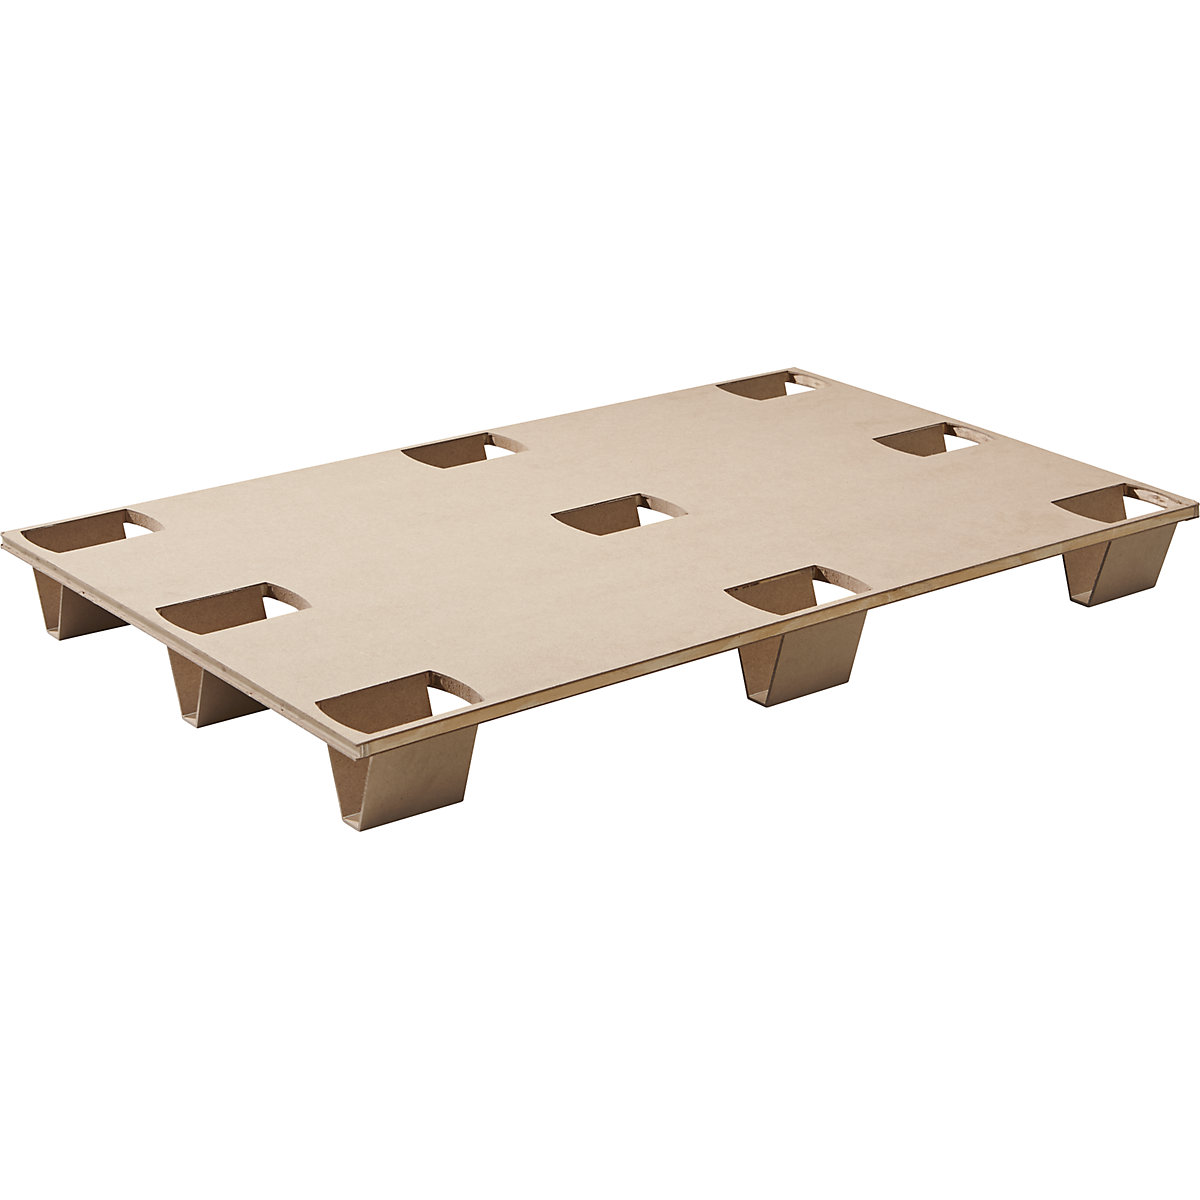 Disposable pallet, pack of 10, made of timber products, 1200 x 800 mm-1